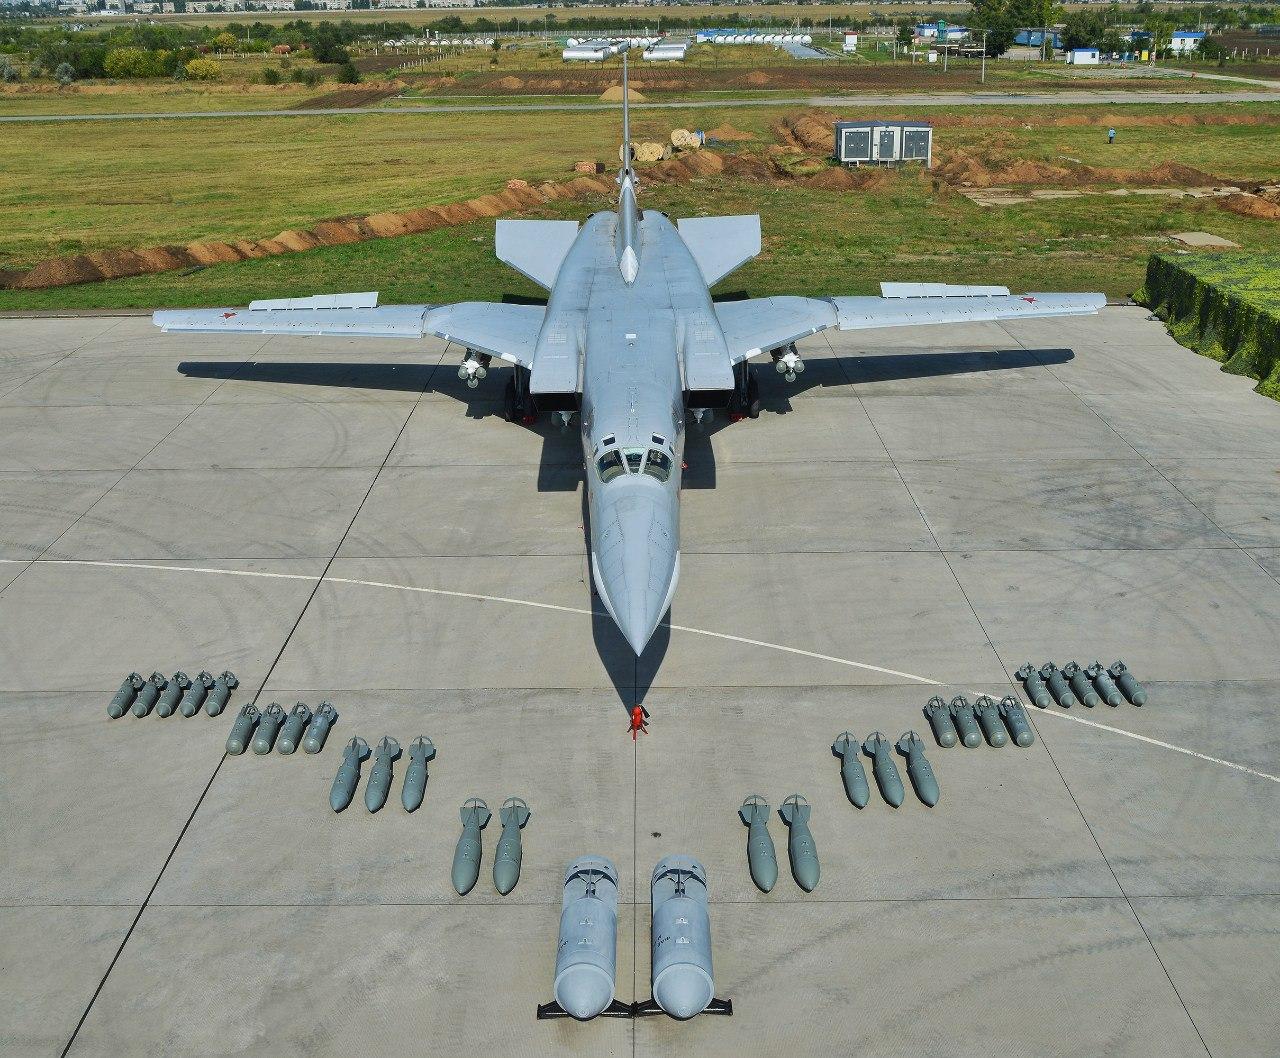 Tu-22M3 and its arsenal of bombs